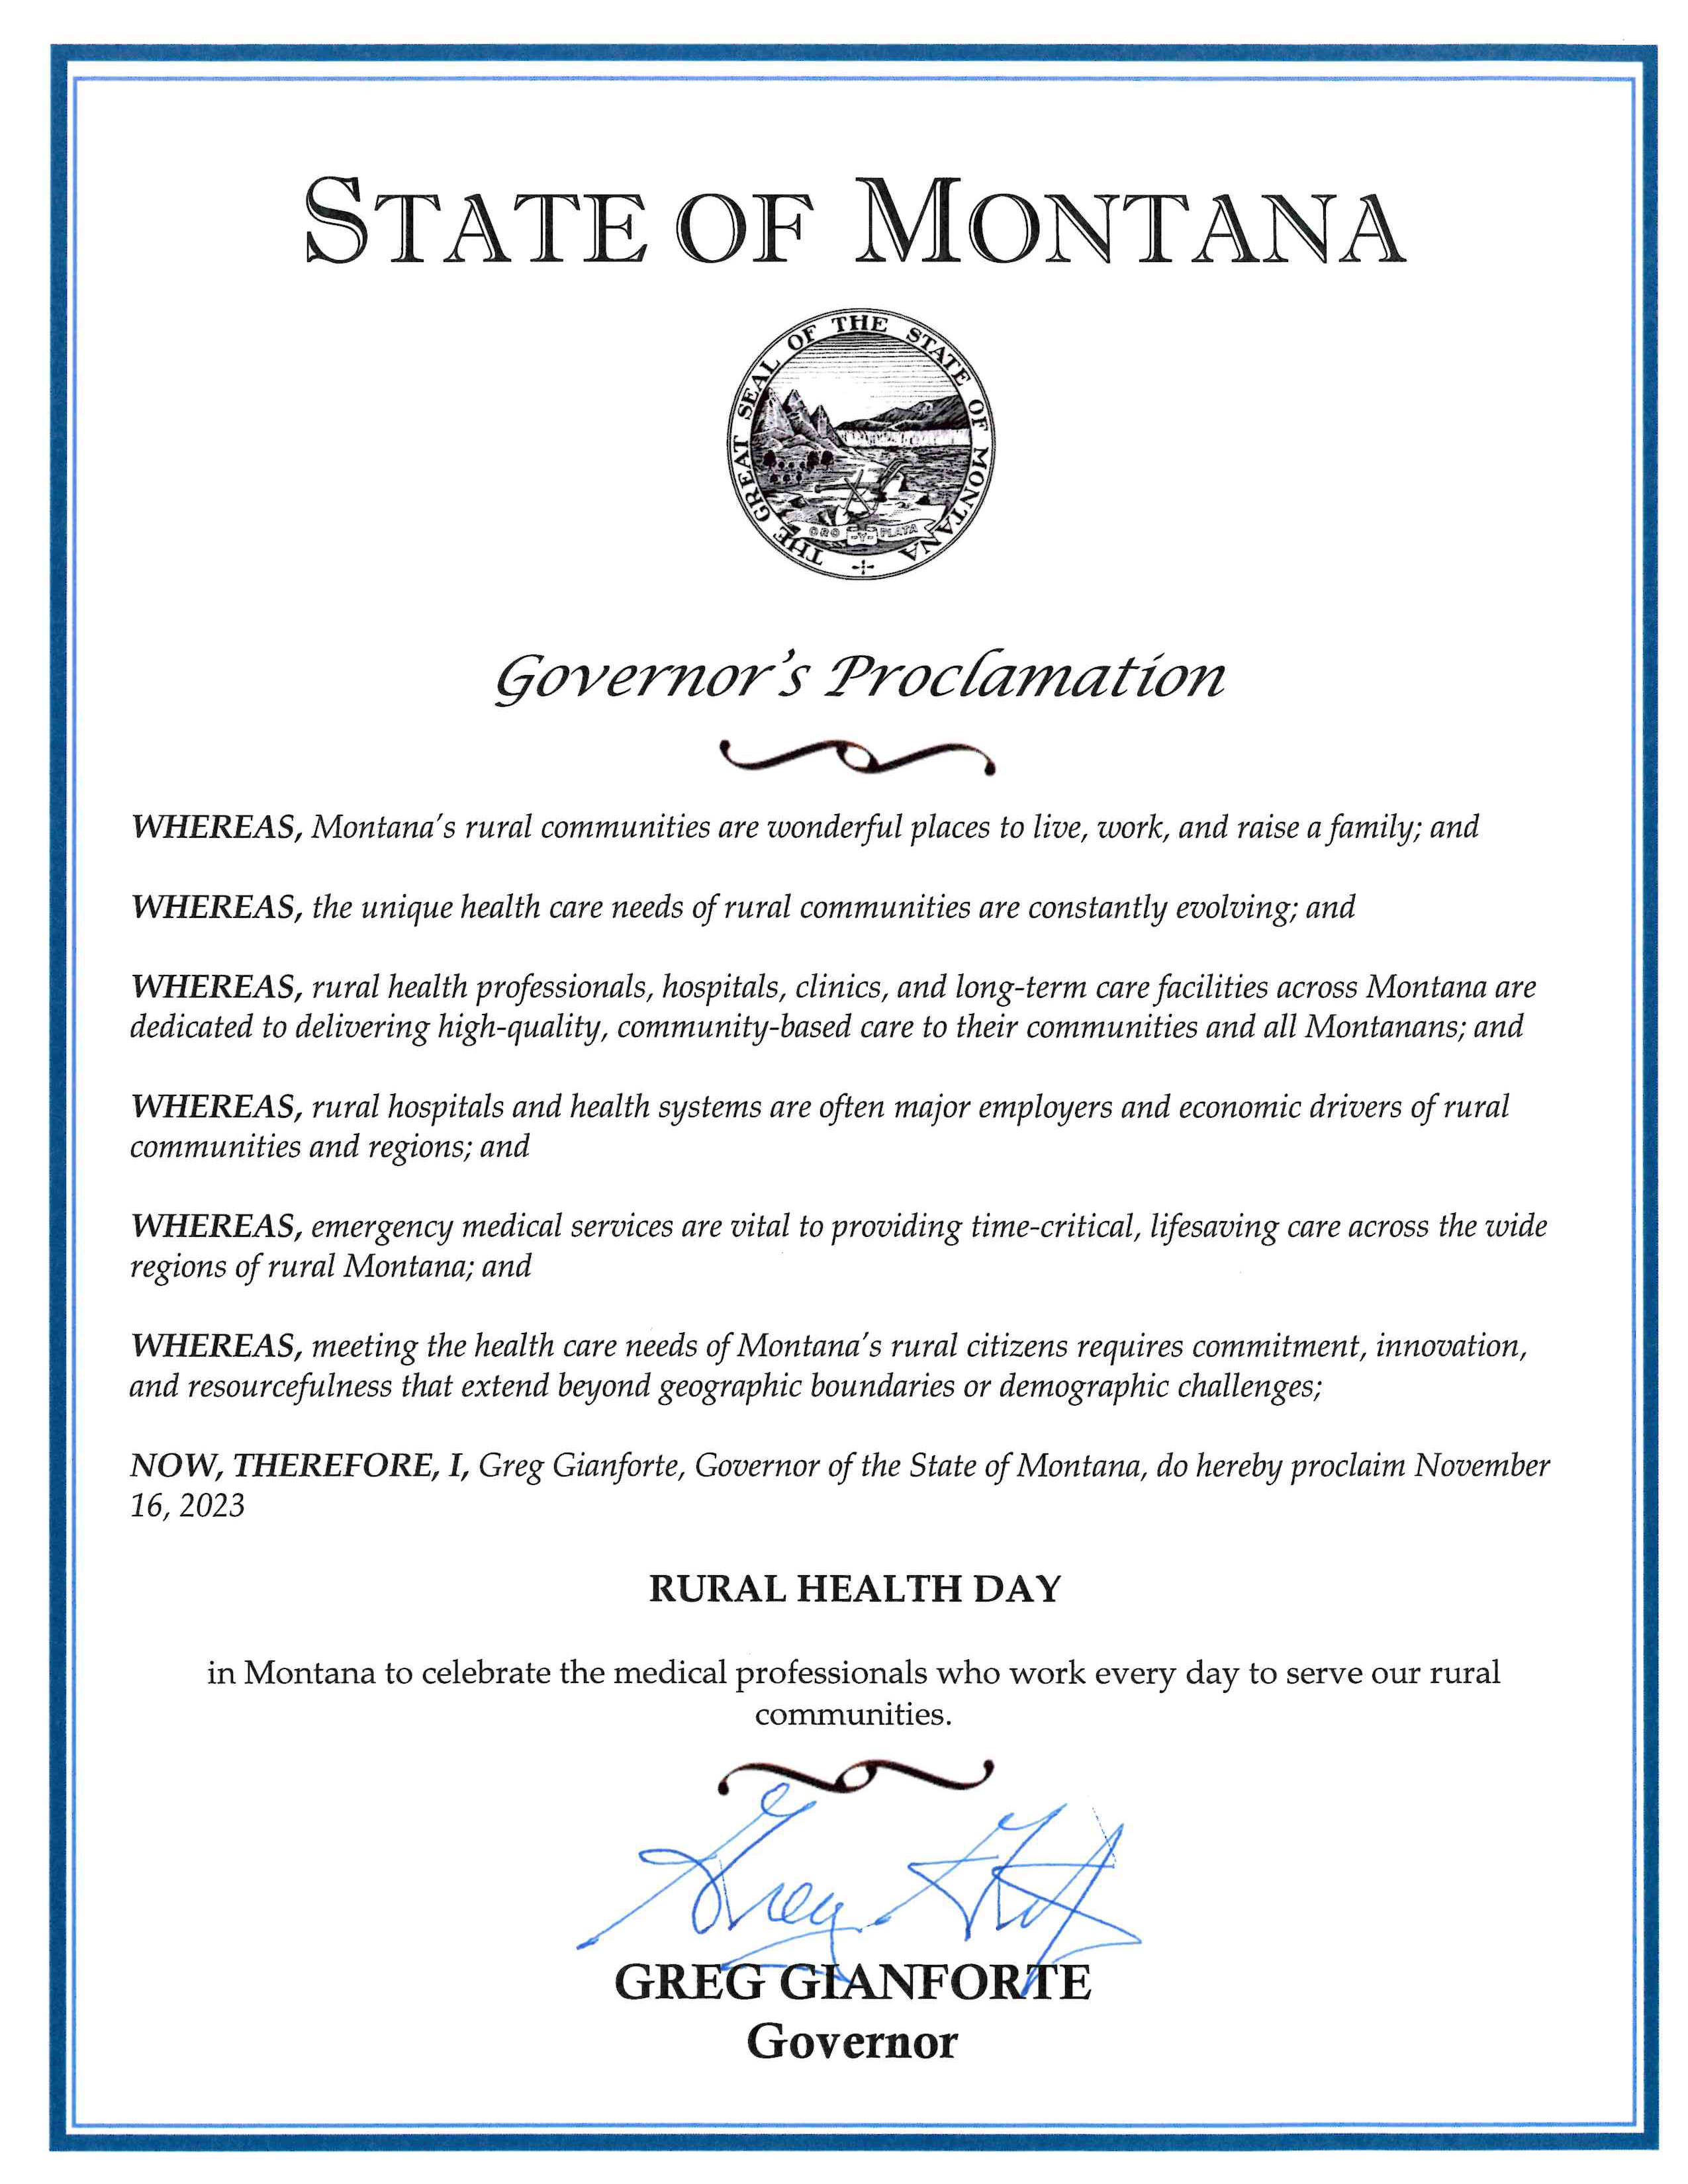 Governor's National Rural Health Day Proclamation